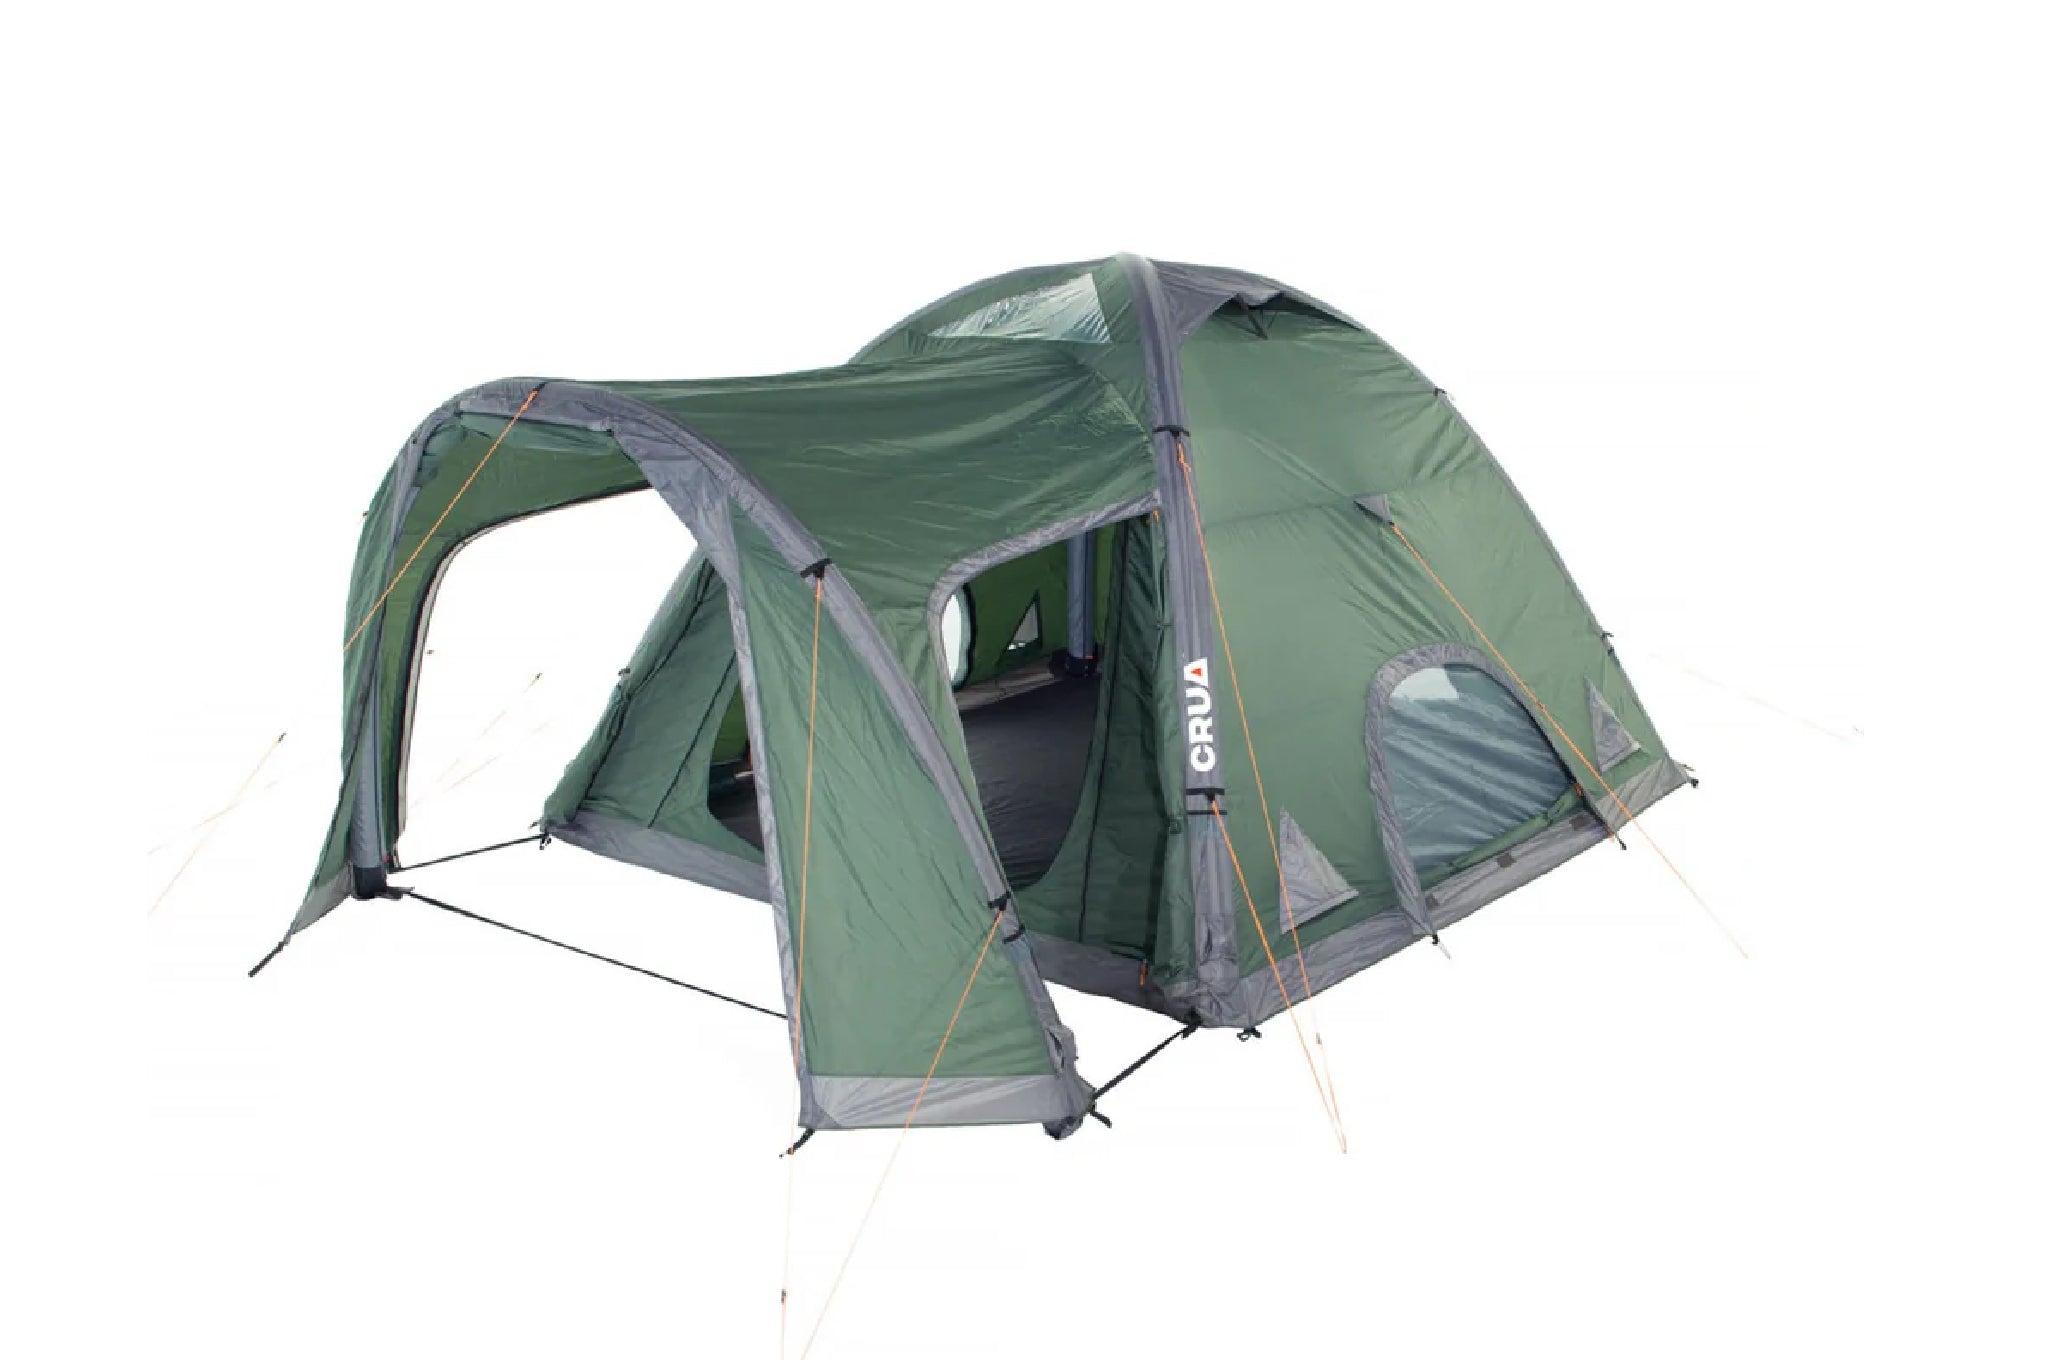 CORE & CULLA FAMILY | INNER & OUTER TENT FULL KIT | 5 PERSON